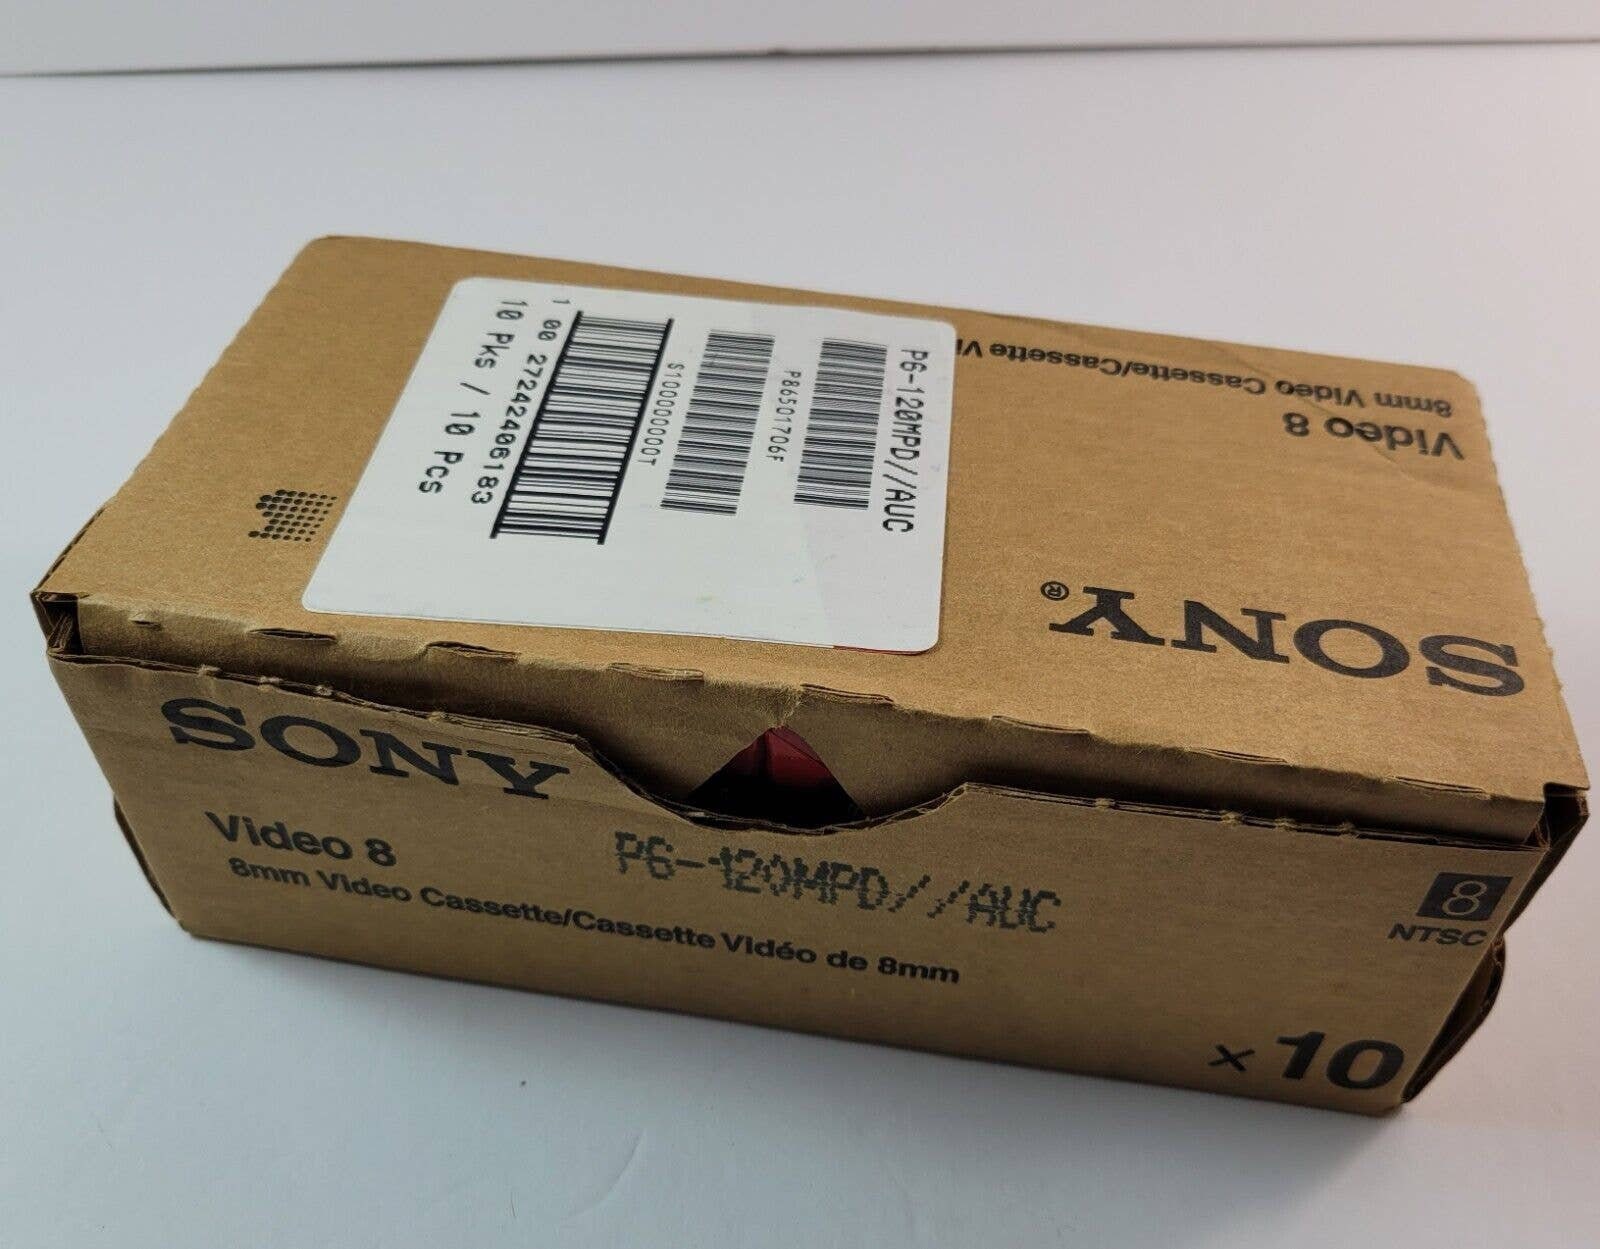 Box of 10 SONY MP 8mm Video8 Camcorder Video Tapes P6-120MP - Etsy